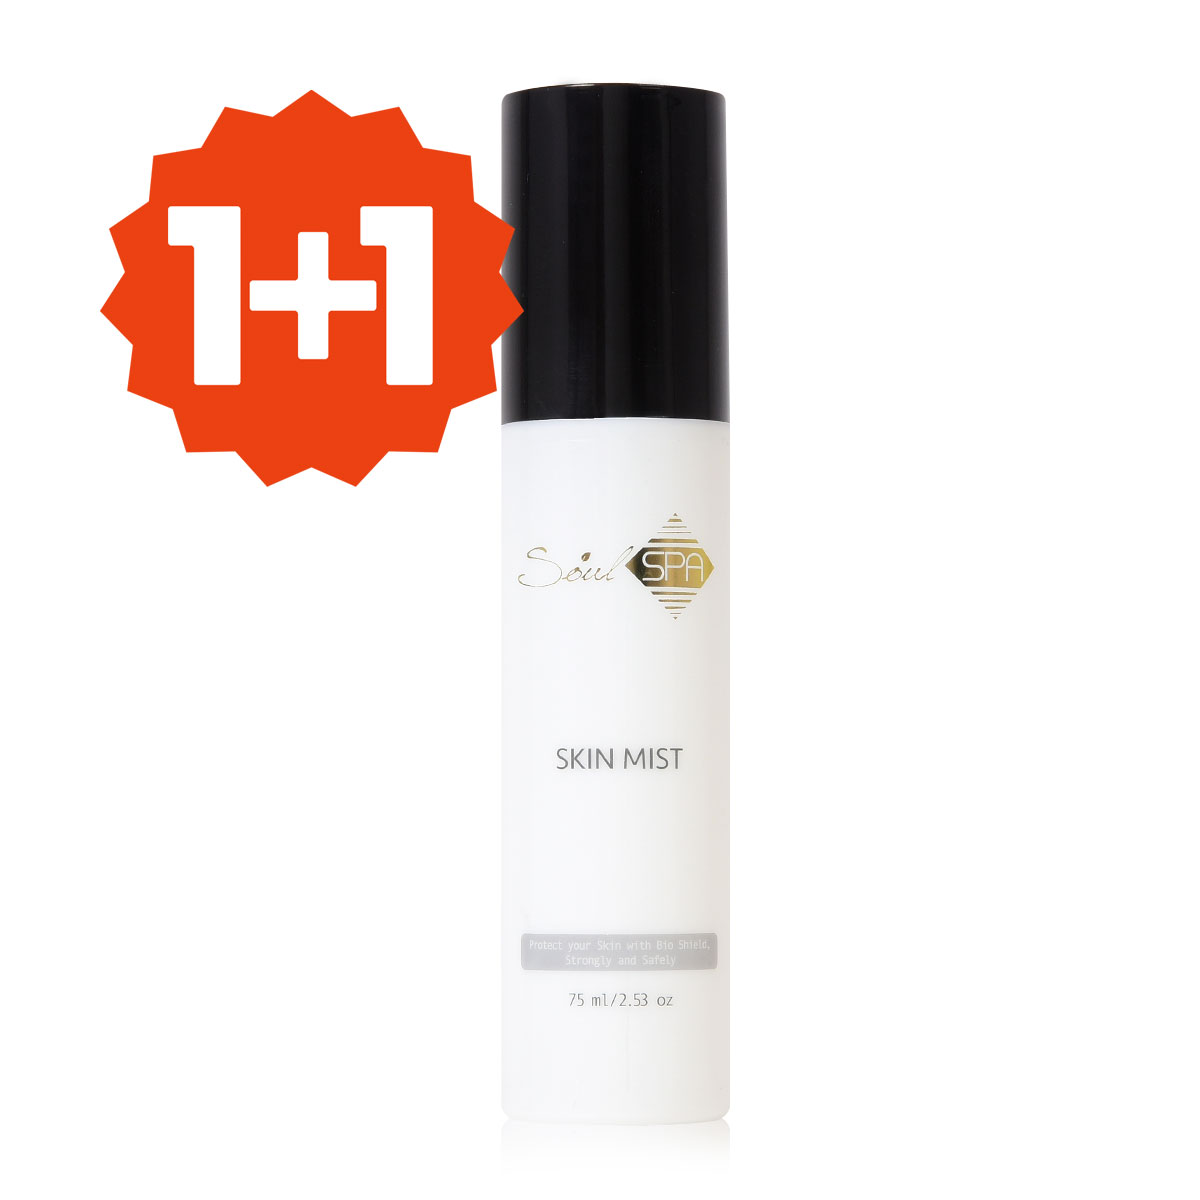 [1+1 Event] Soul Spa Skin Mist 75ml (Mask Trouble Soothing) / Iron Wall Mist